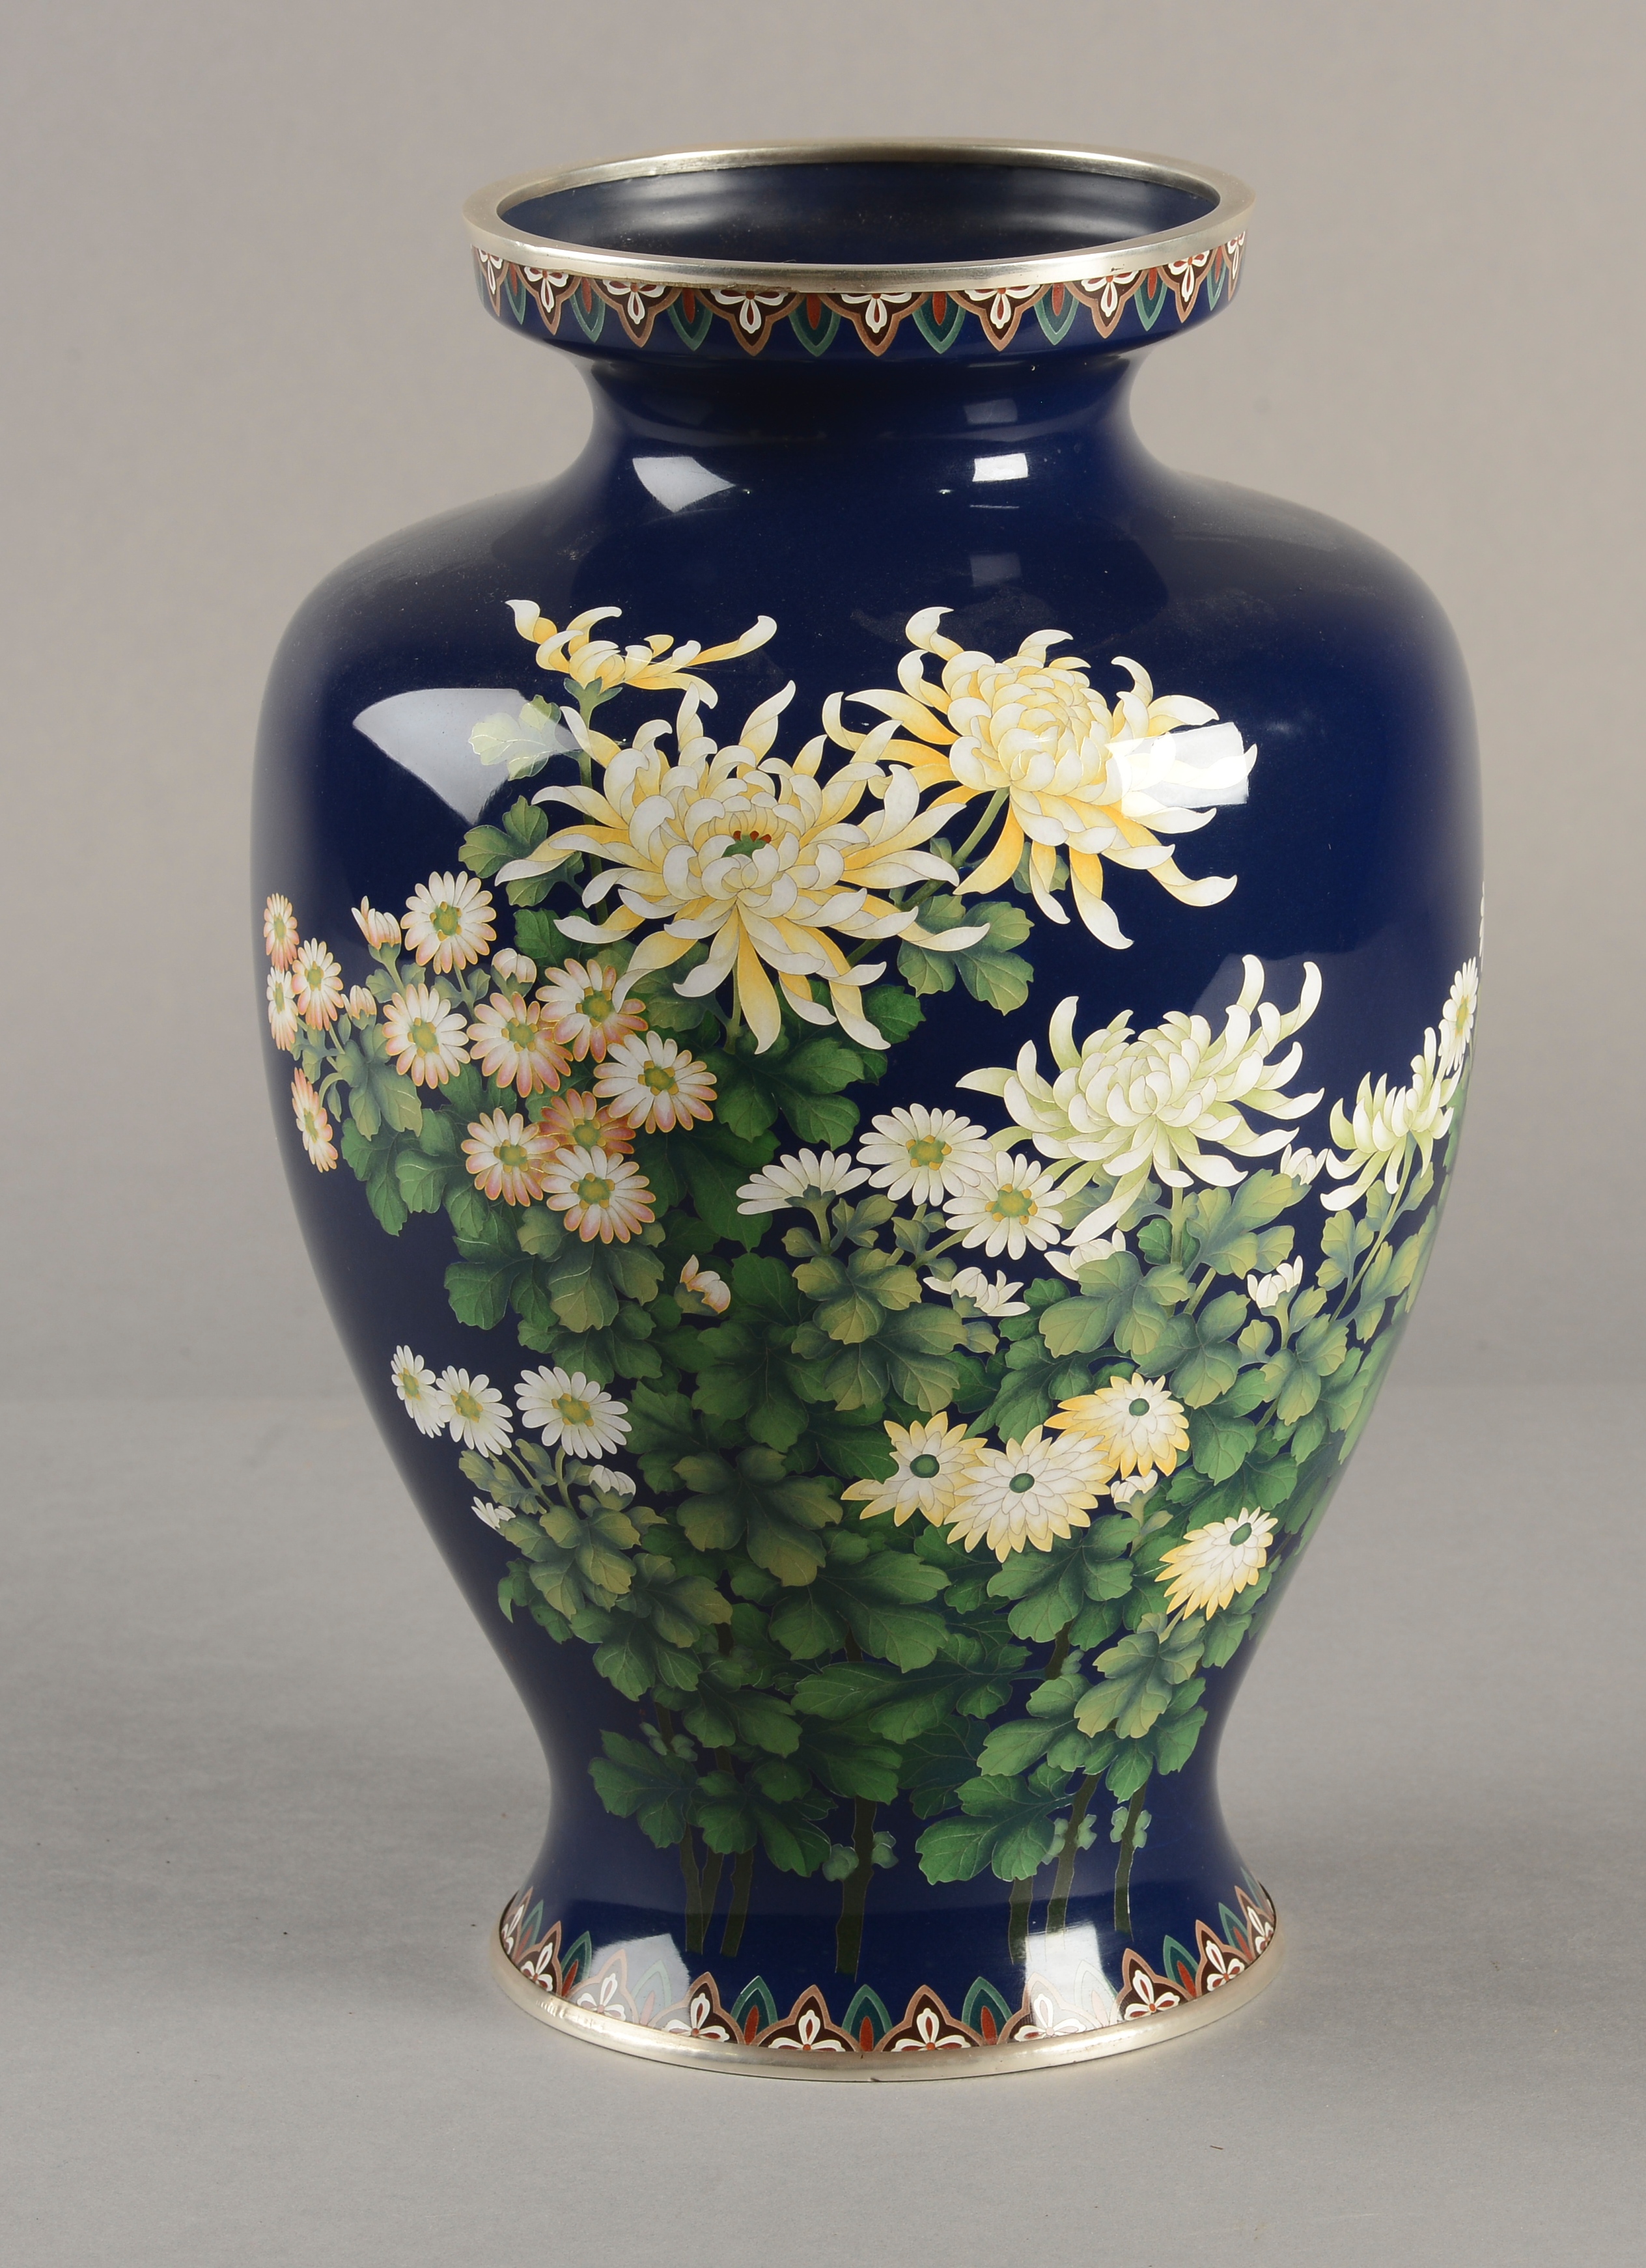 A FINE QUALITY ANDO JUBEI CLOISONNE VASE, second quarter of the 20th century,